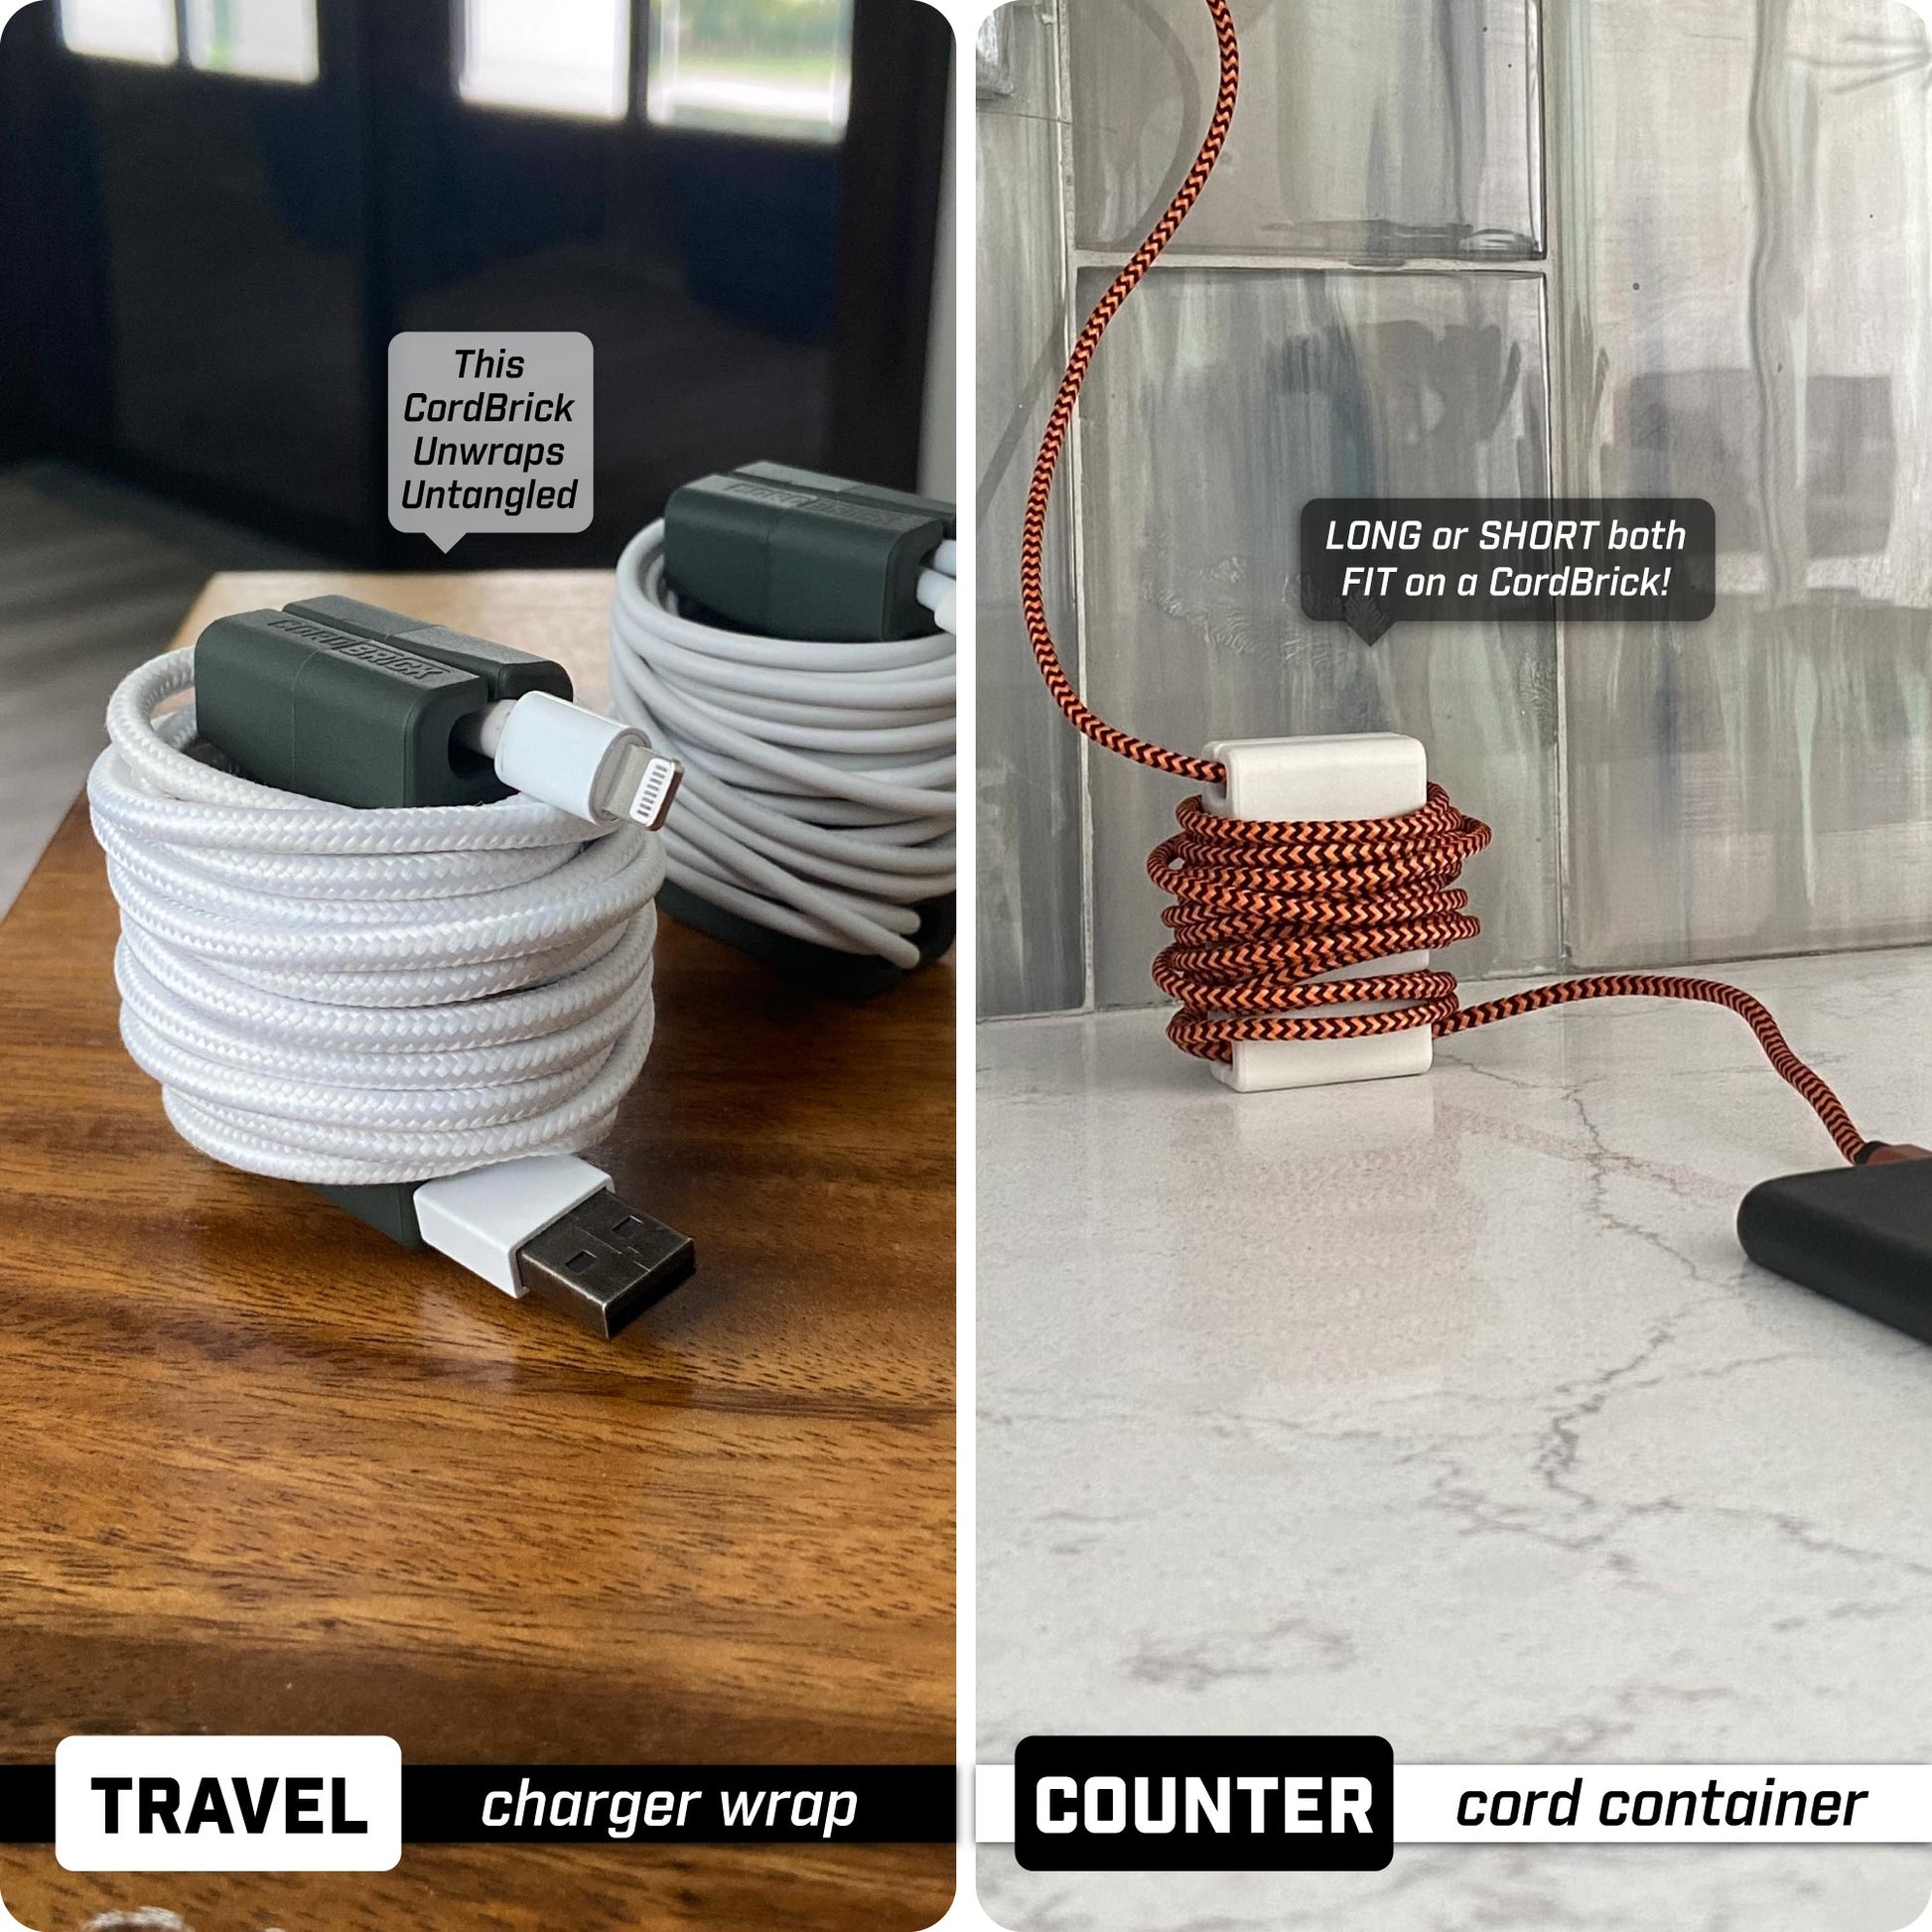 CordBrick Wrapping Multiple Cords for Travel and Shortening a Long Cord on a Countertop.